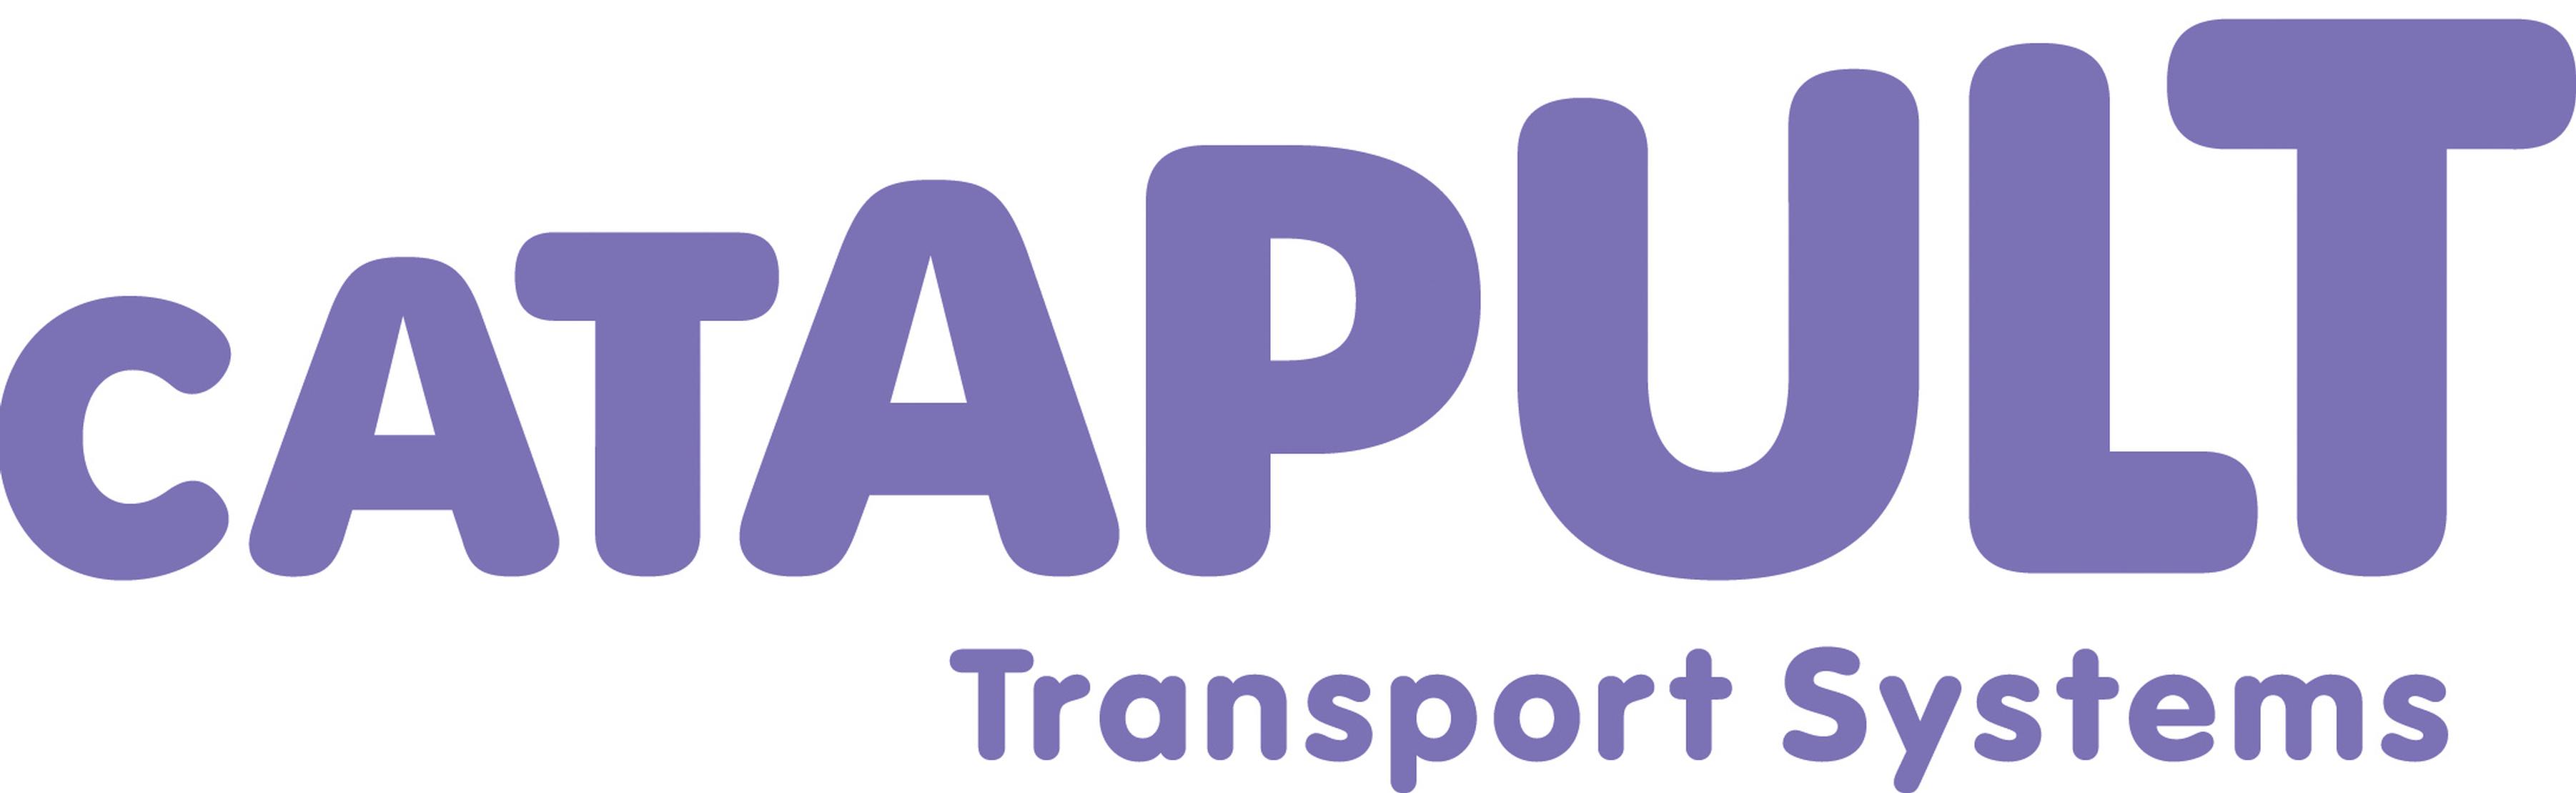 The Transport Systems Catapult has failed to hit commercial funding targets